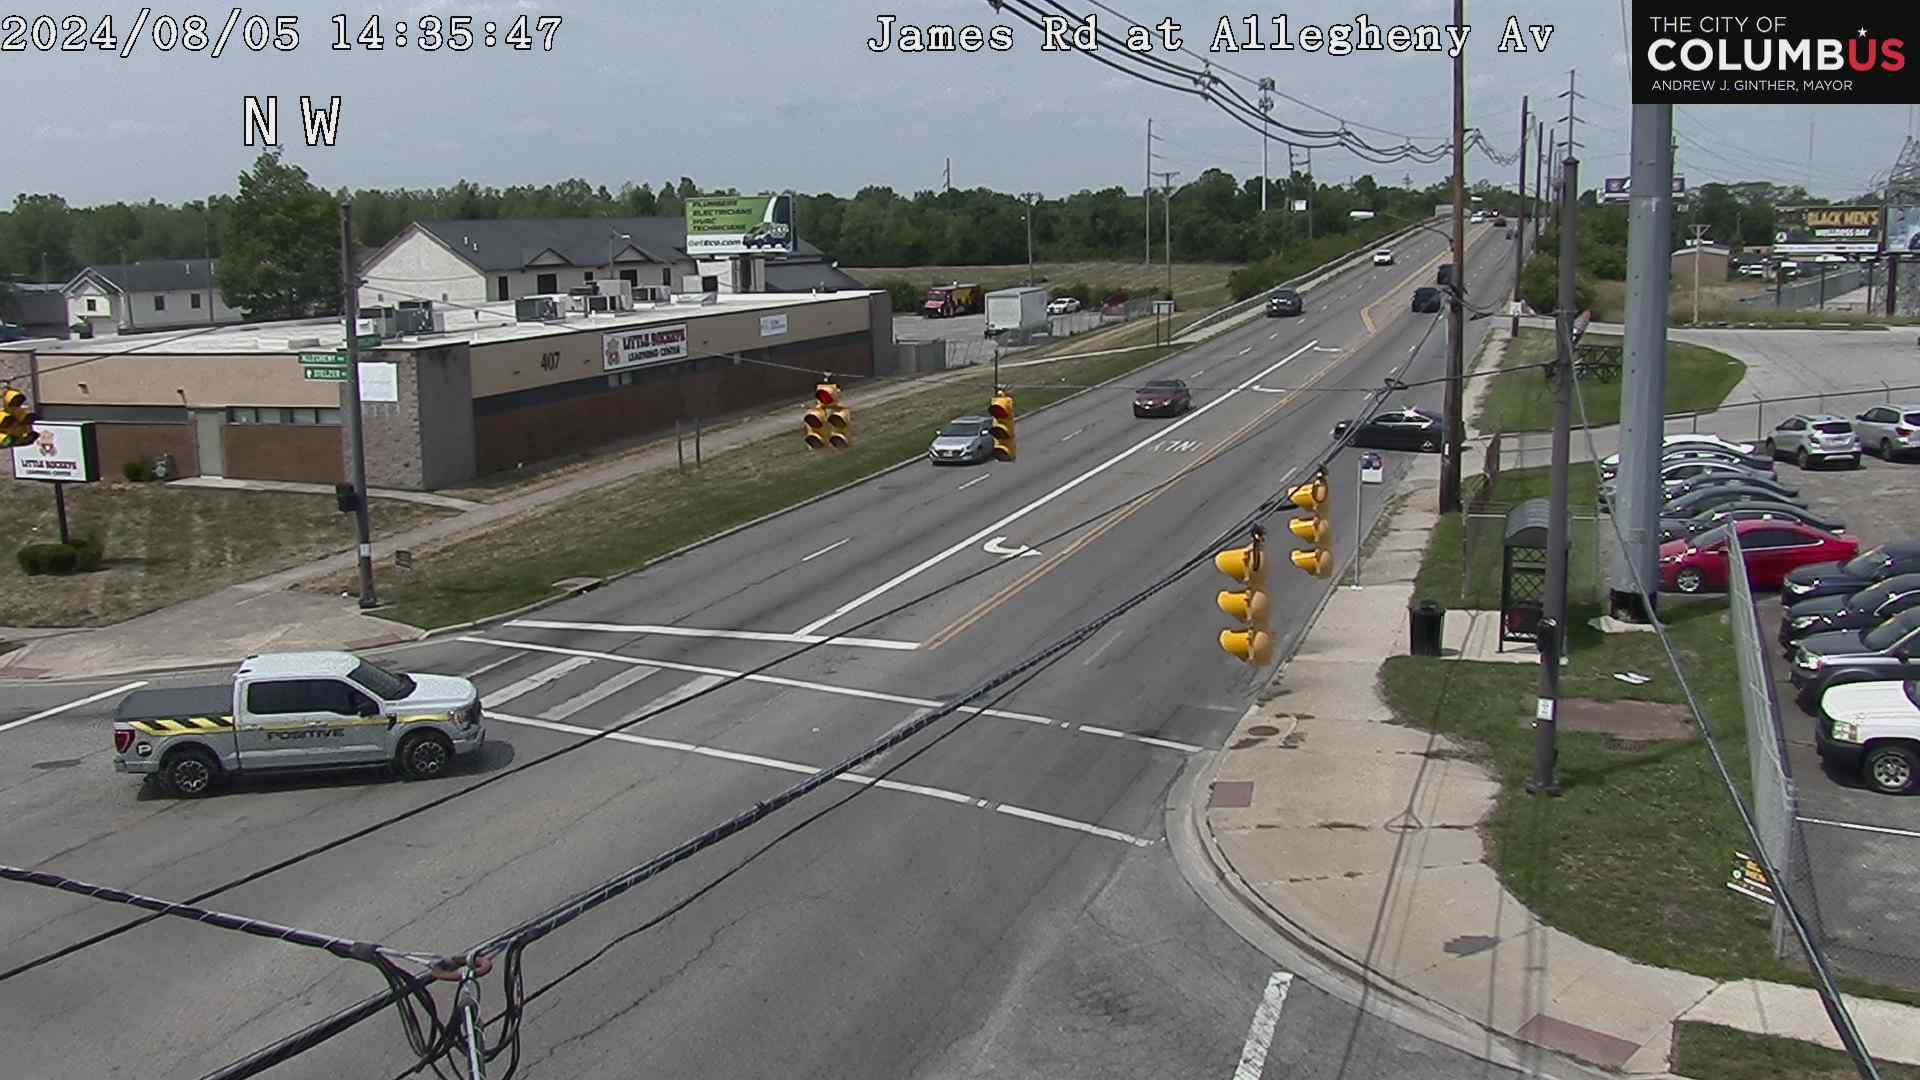 Traffic Cam Columbus: City of - James Rd at Allegheny Ave